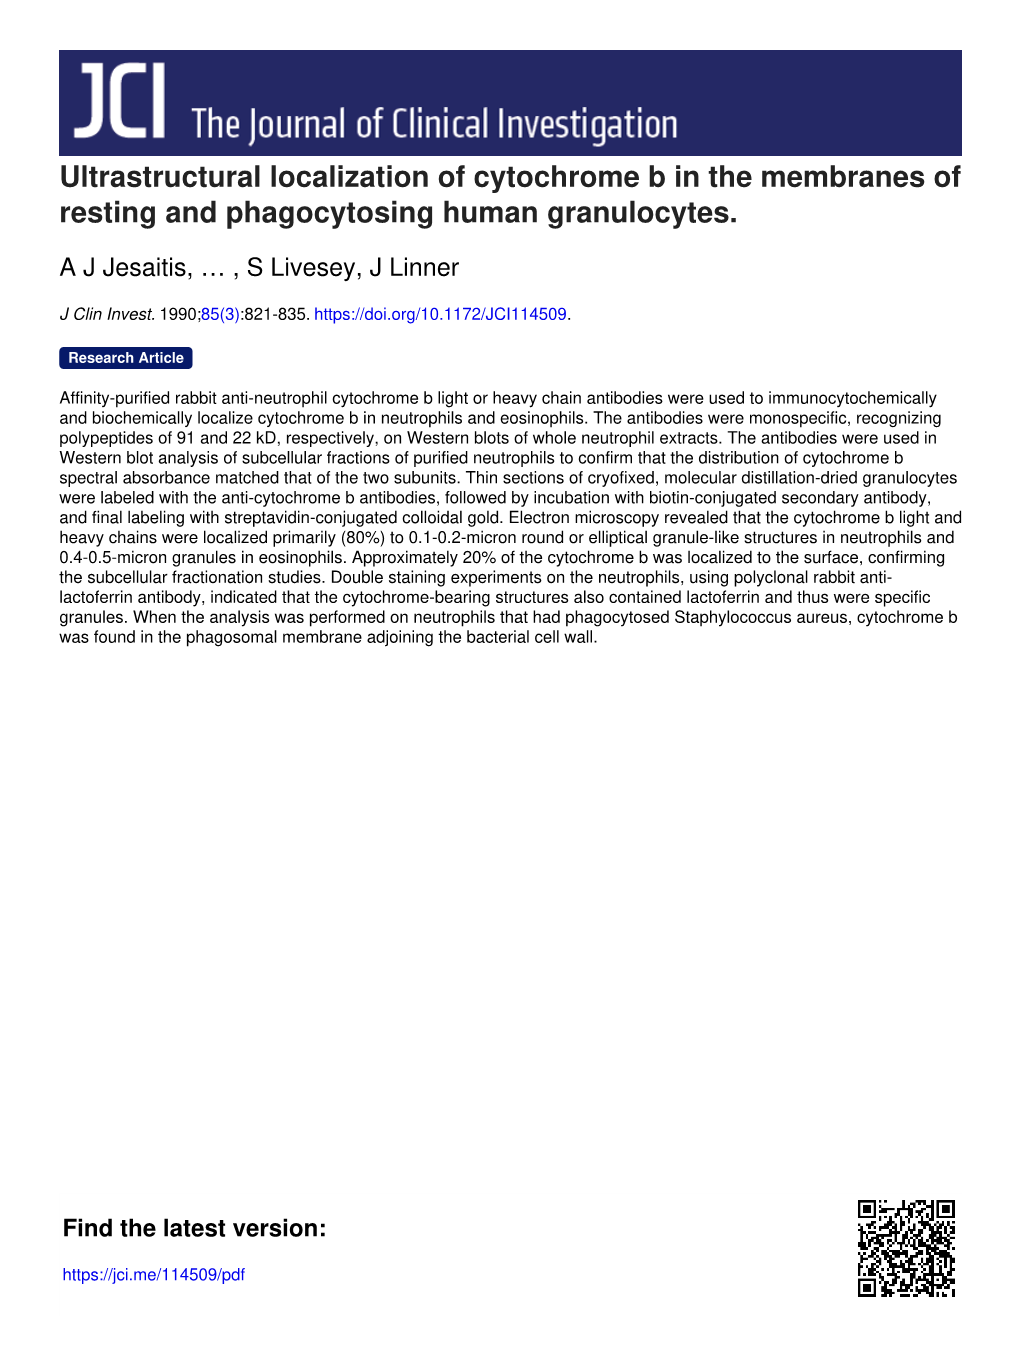 Ultrastructural Localization of Cytochrome B in the Membranes of Resting and Phagocytosing Human Granulocytes